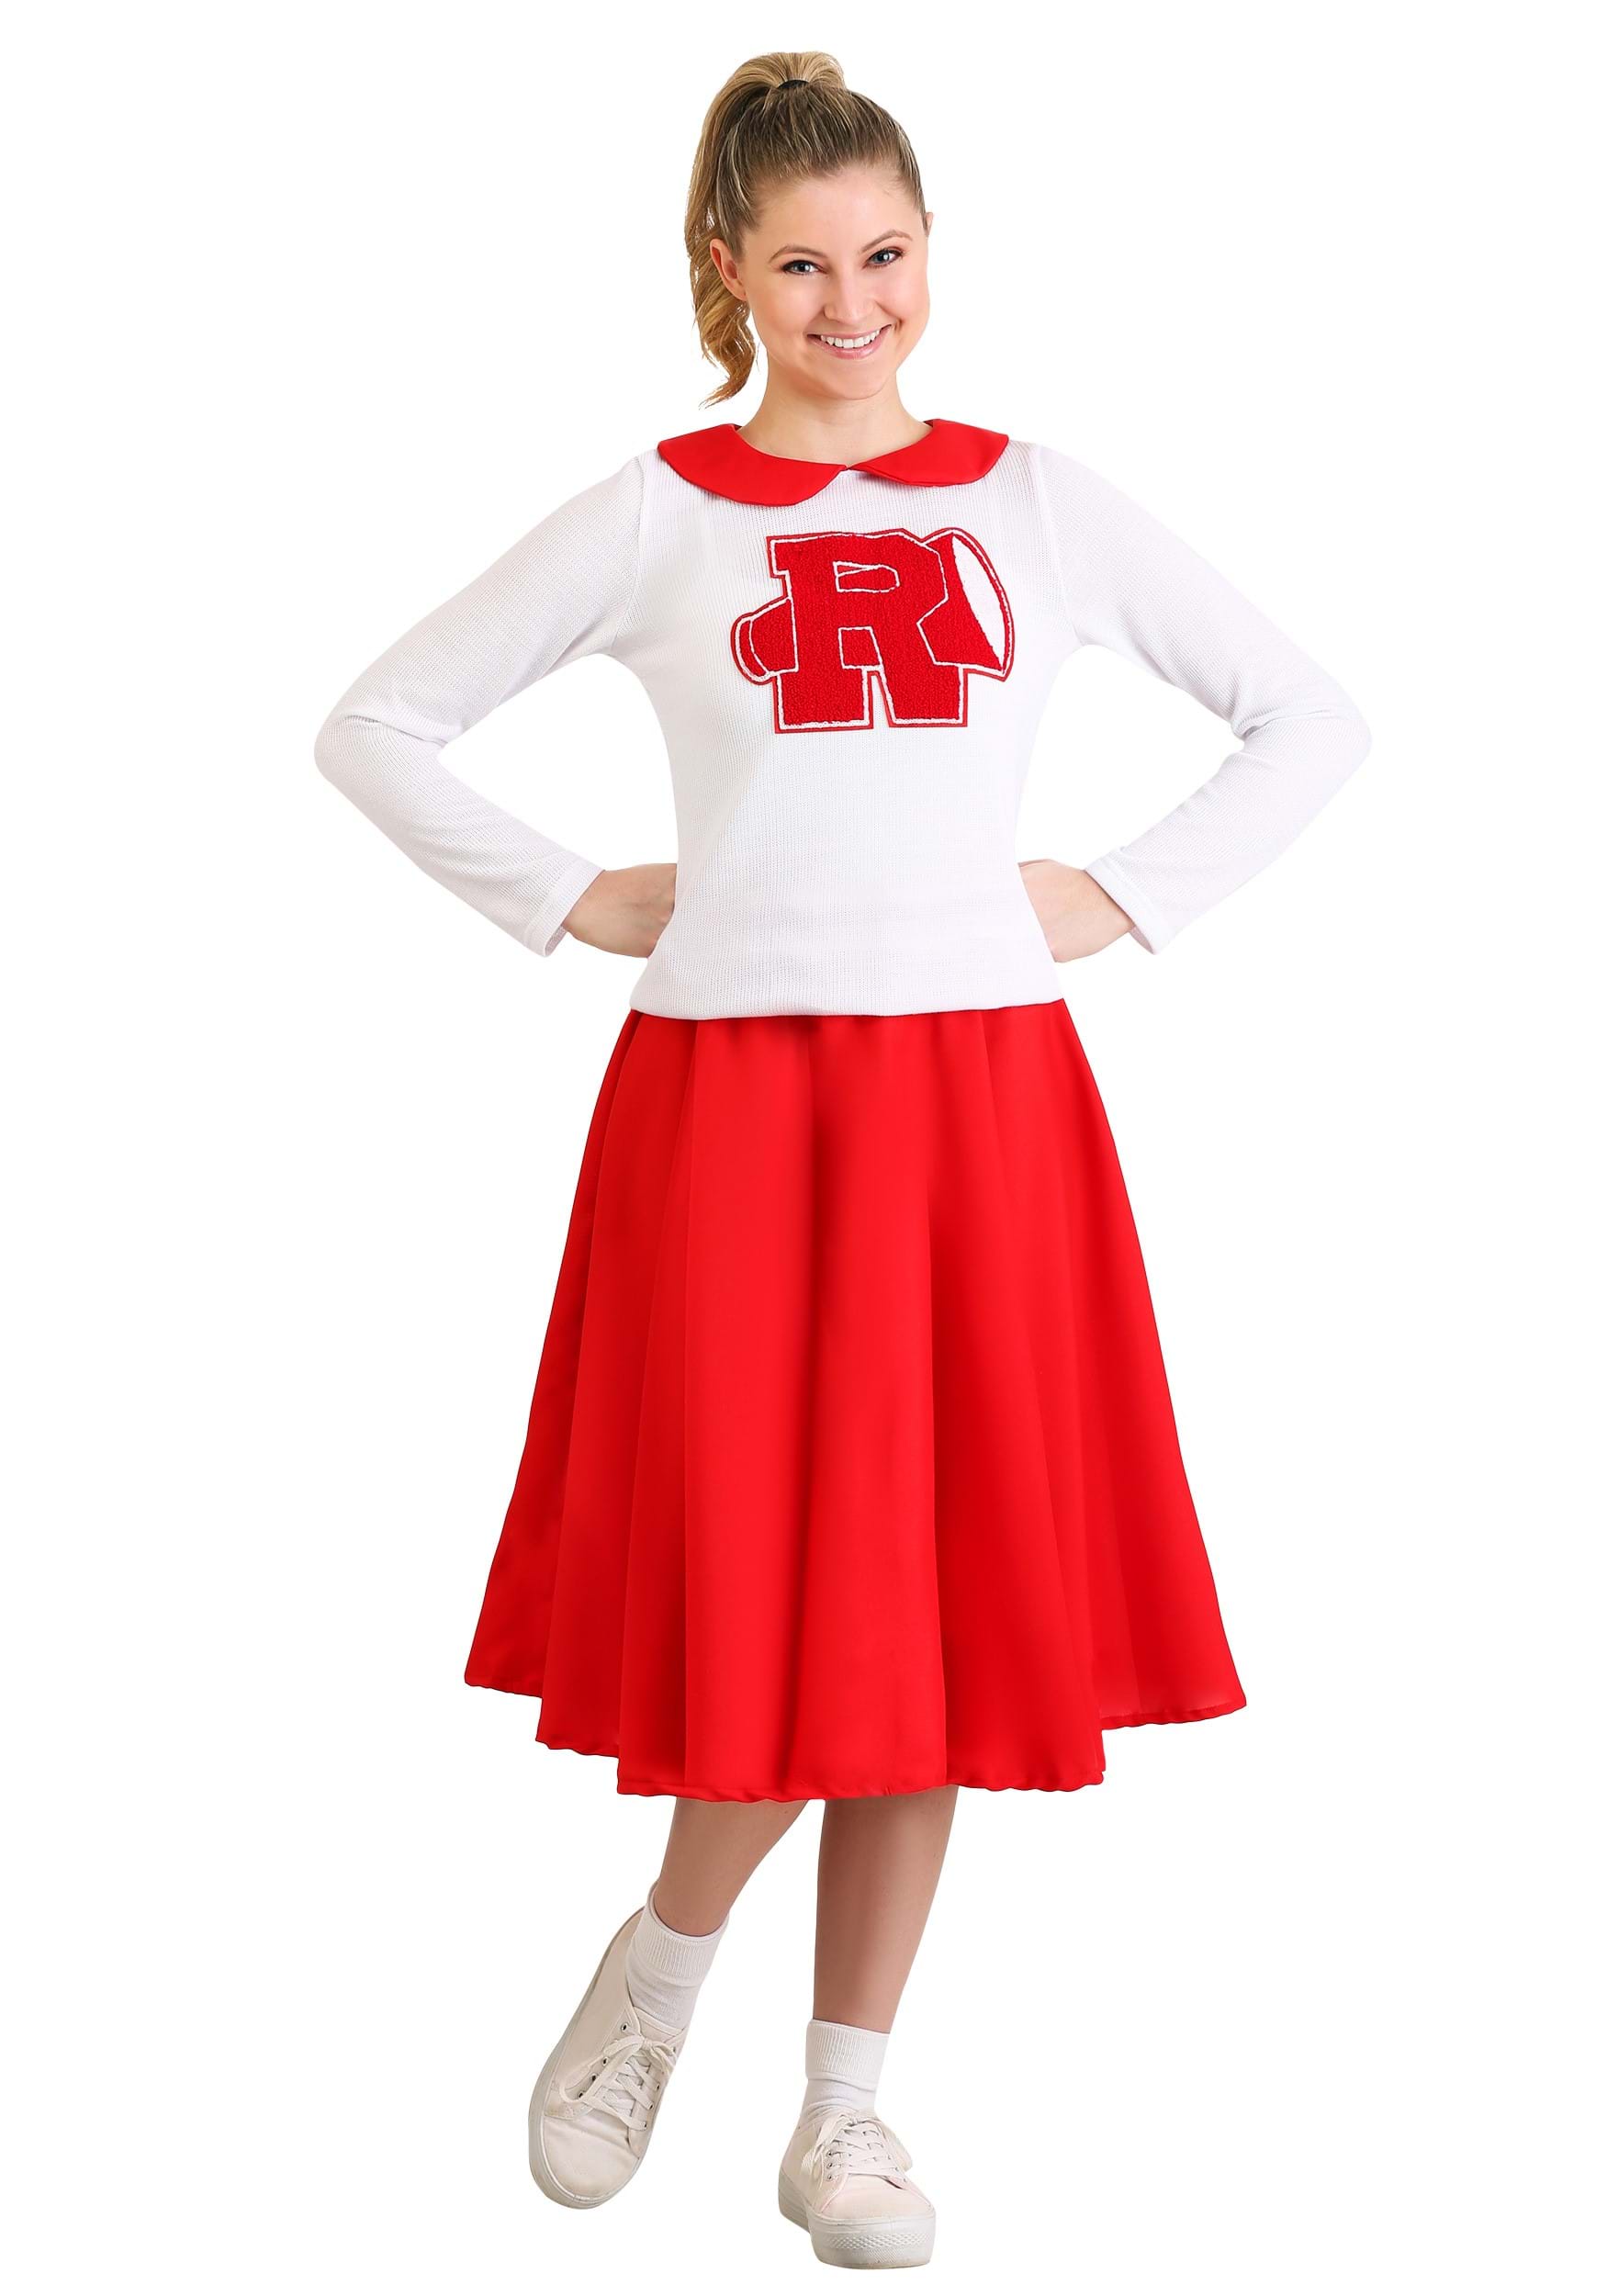 Photos - Fancy Dress FUN Costumes Grease Rydell High Cheerleader Women's Costume Red/White